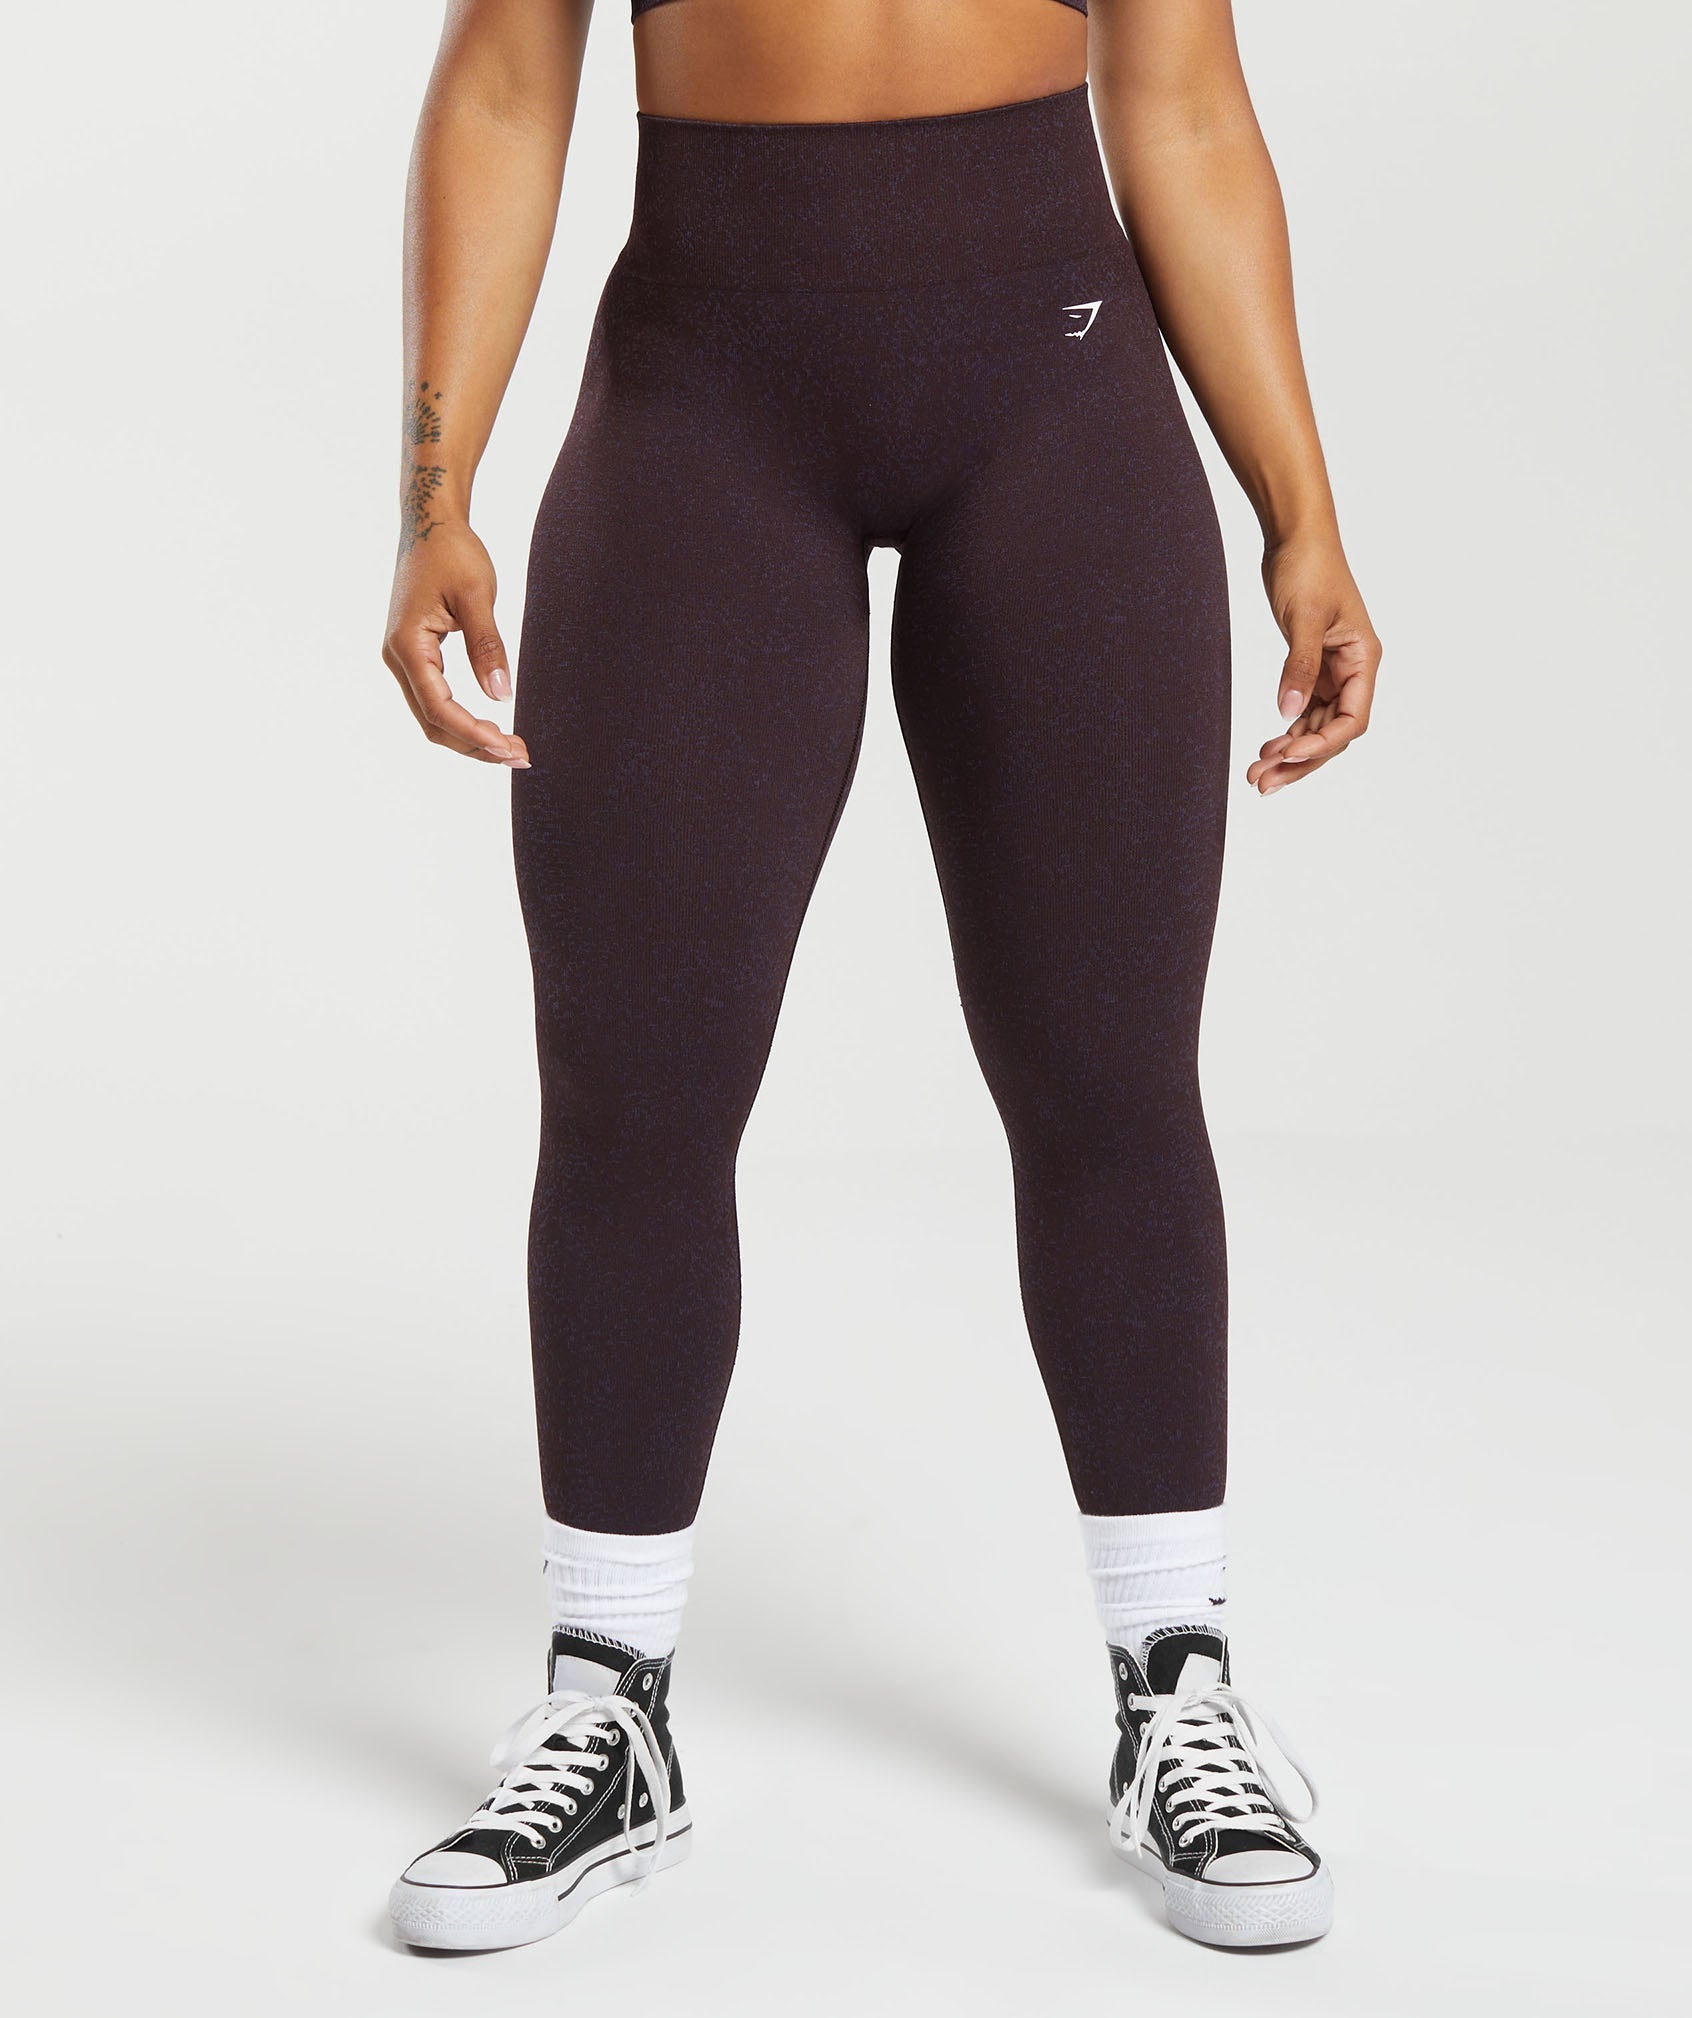 Pin by RLQ on Gymshark  Workout leggings, Workout clothes, Sport outfits